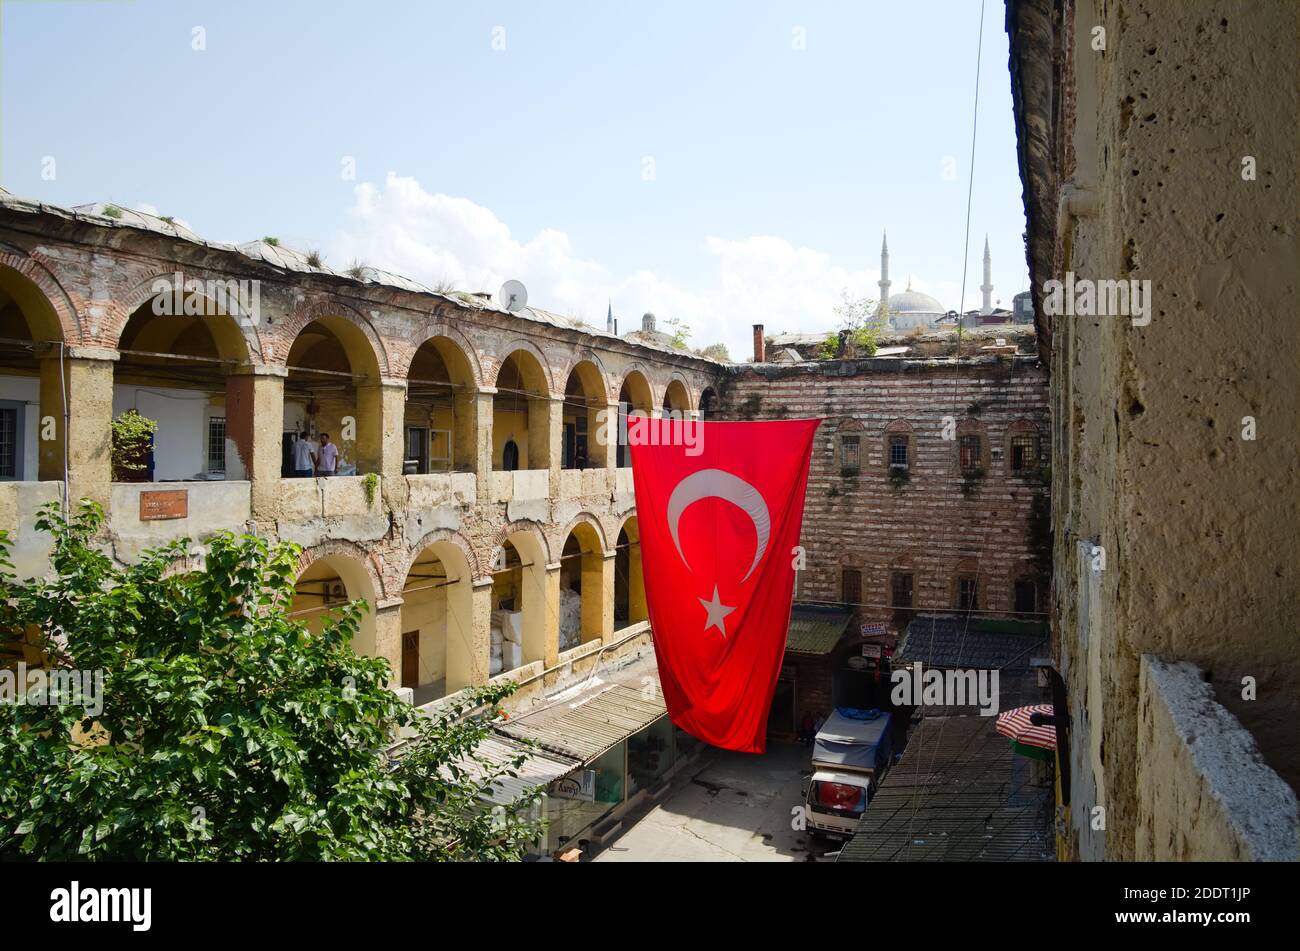 Istanbul, Turkey - September, 2018: Large hanging Turkish flag in the courtyard of old historic building on Grand Bazaar in Istanbul. Stock Photo